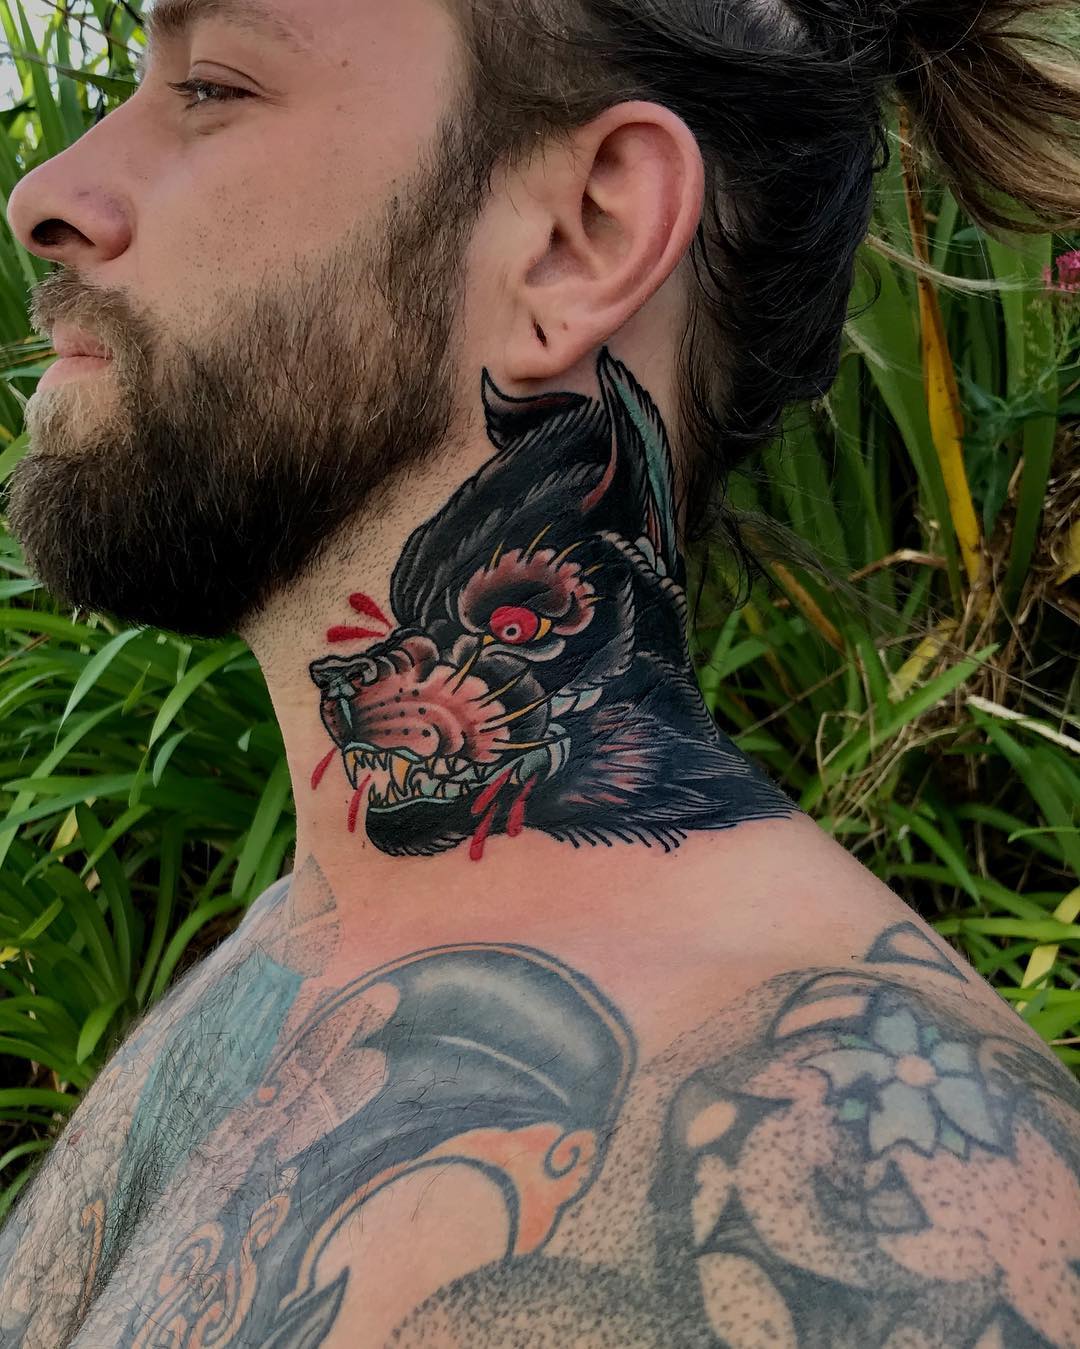 75+ Best Neck Tattoos For Men and Women - Designs & Meanings (2019)